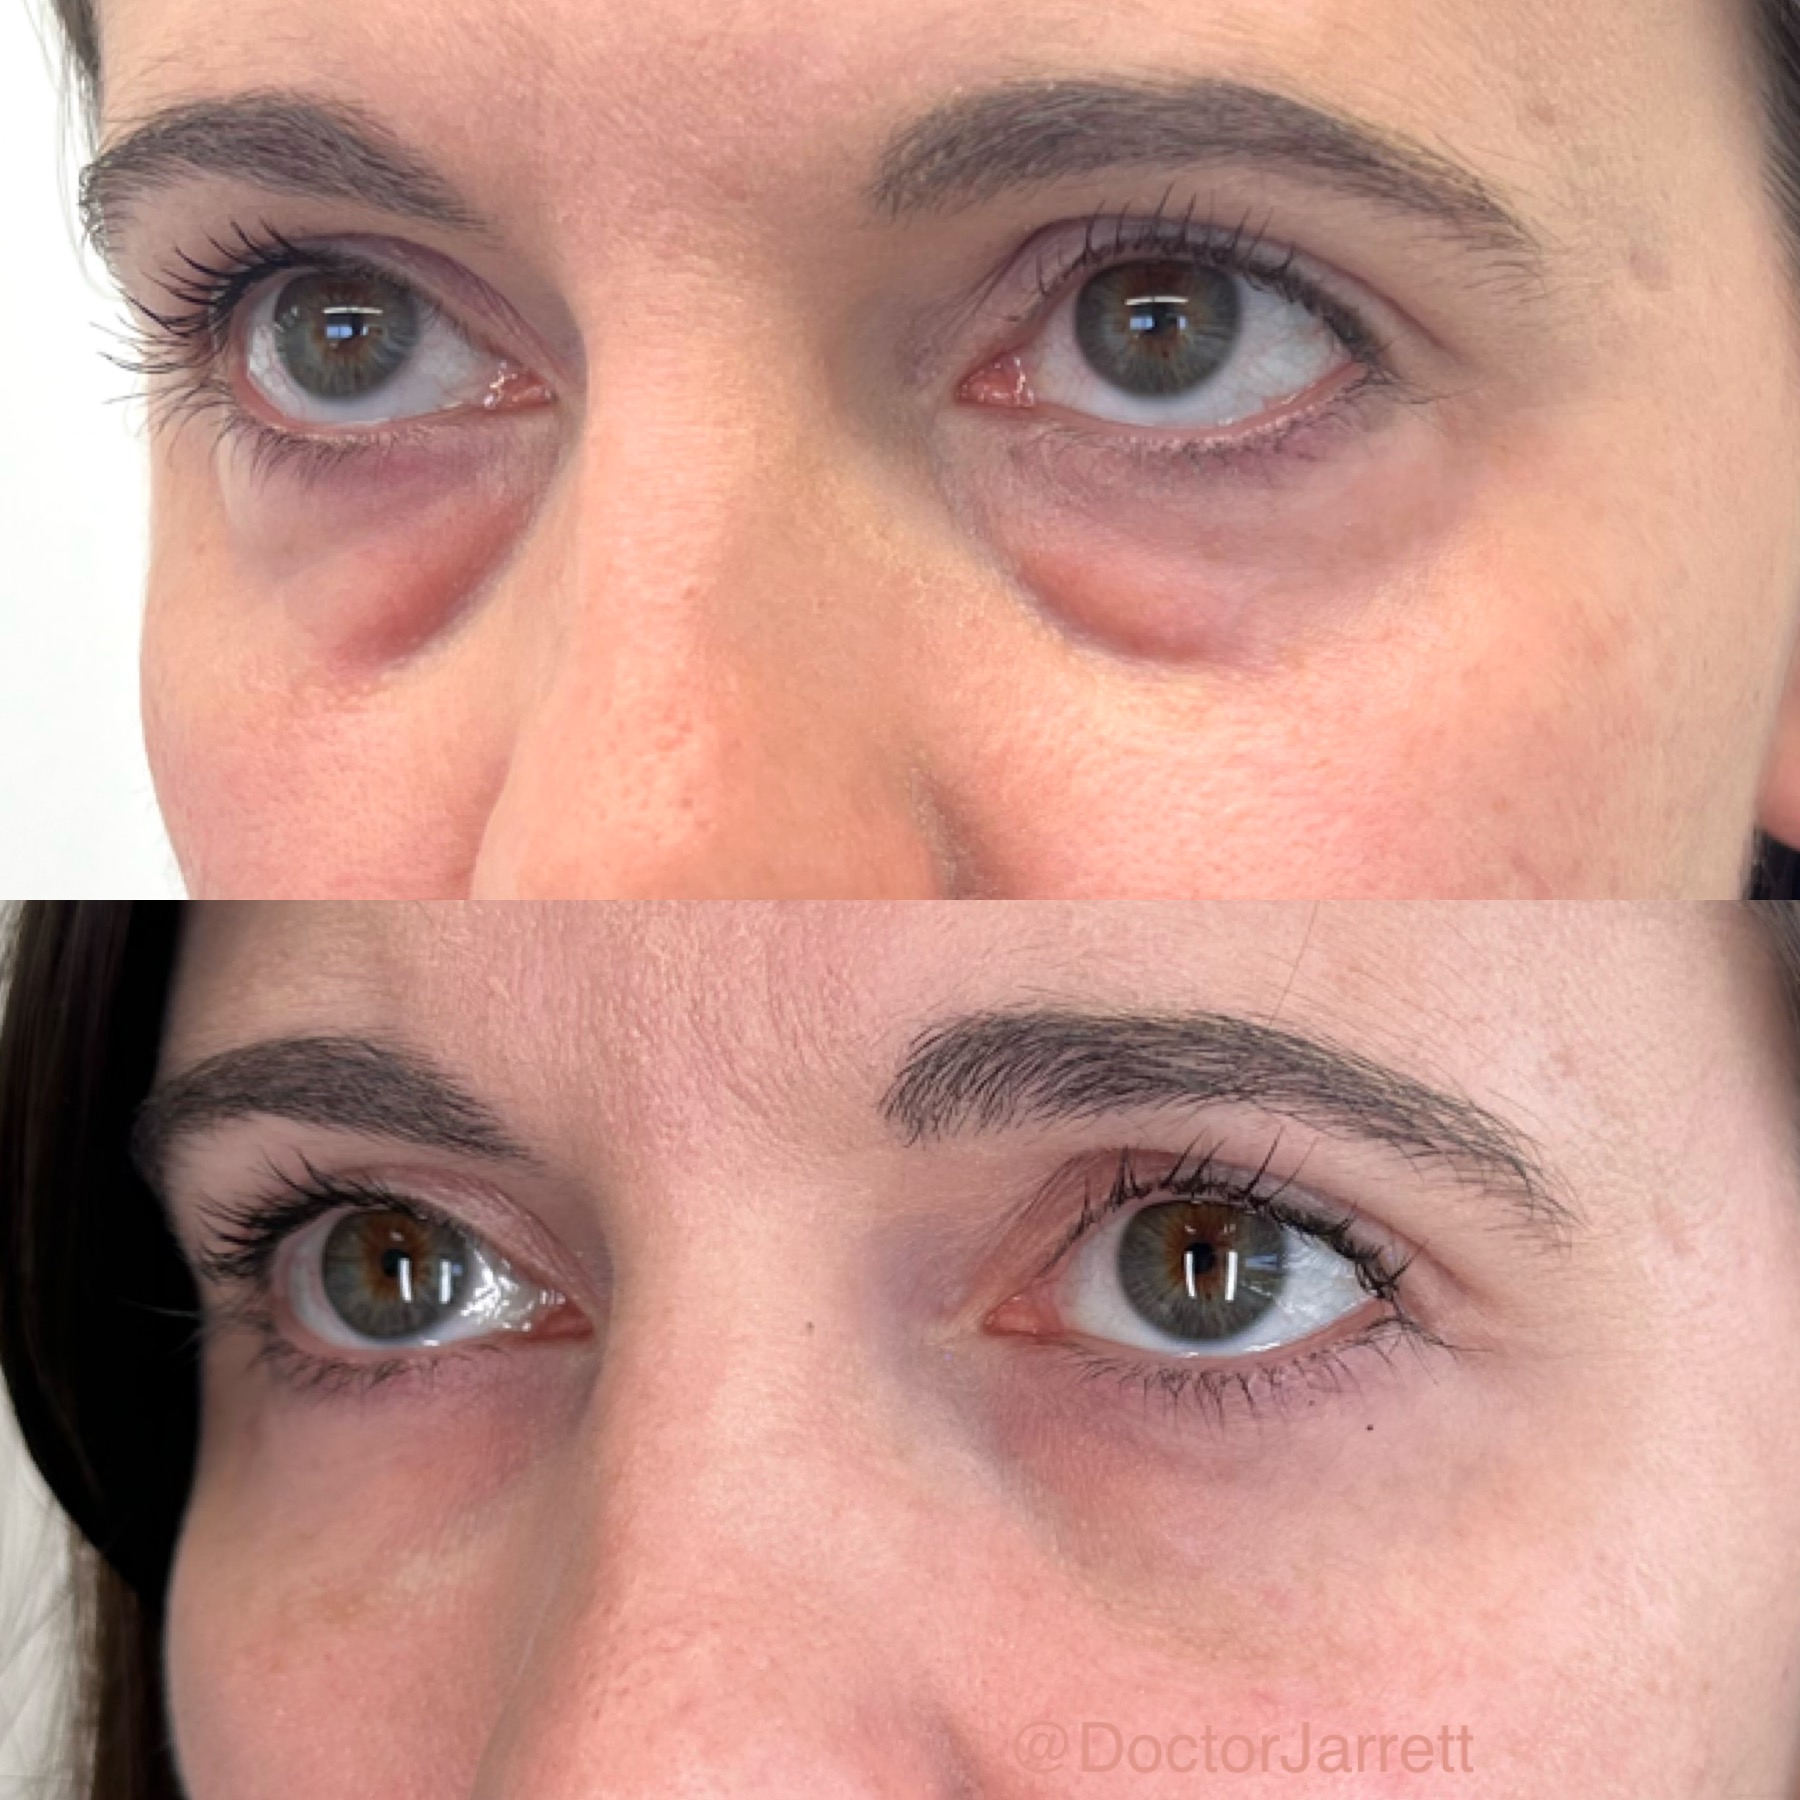 under eyes under eye filler under eye bags undereyes undereyesfiller filler injections medspa doctor jarrett doctor miami new york injections injectable non surgical cosmetic beauty